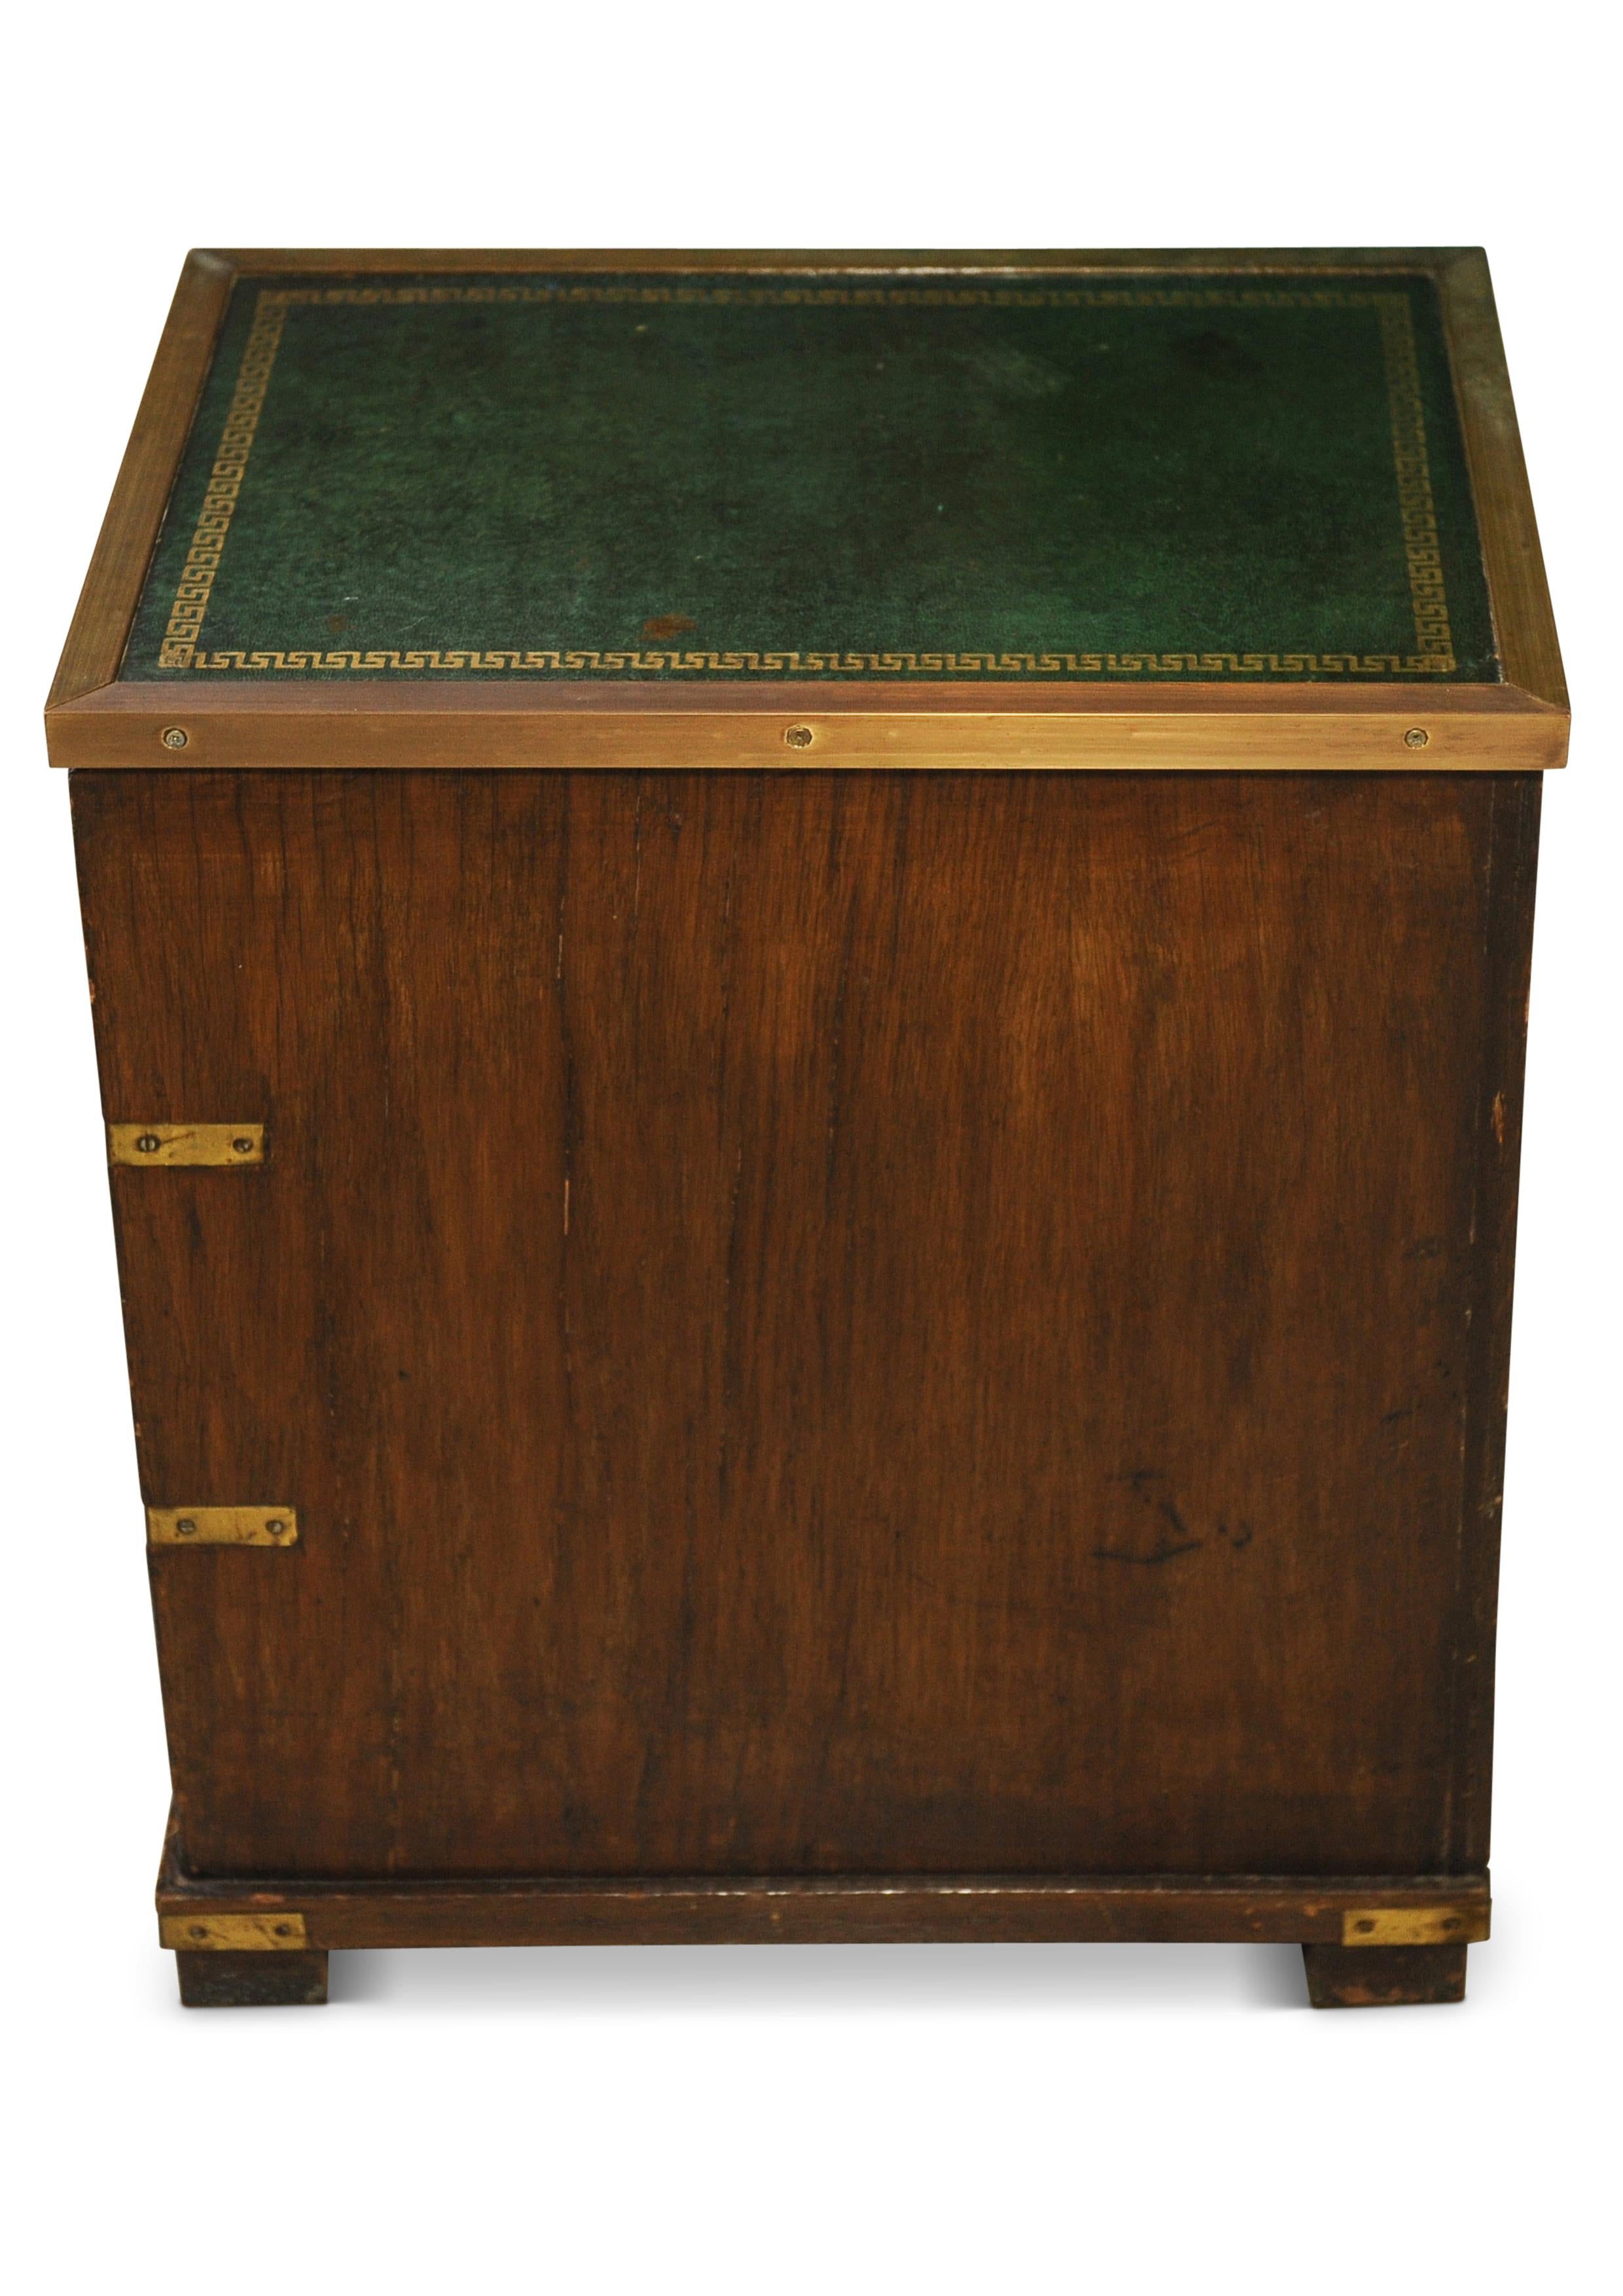 Victorian Military Campaign Chest / Cabinet  Green Leather & Brass Tooled Top In Good Condition For Sale In High Wycombe, GB